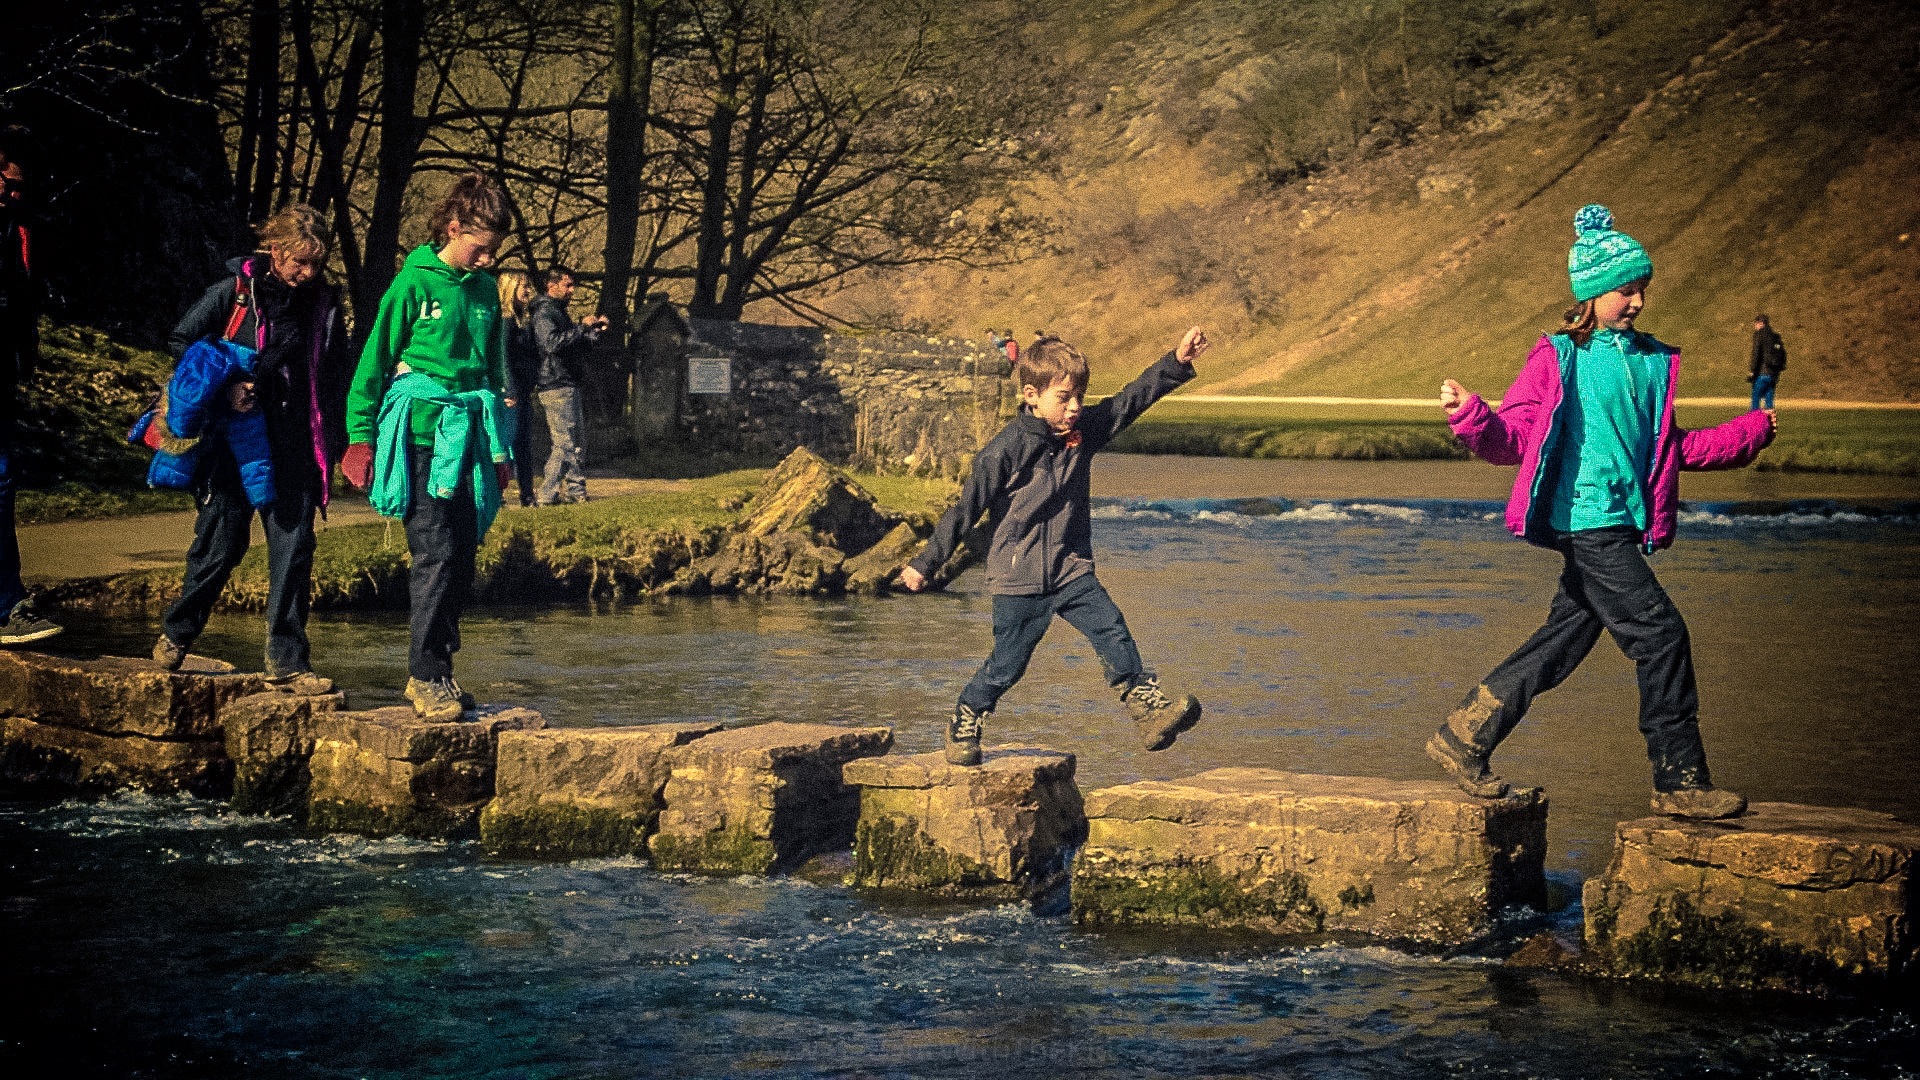 Crossing the Dovedale Stepping Stones